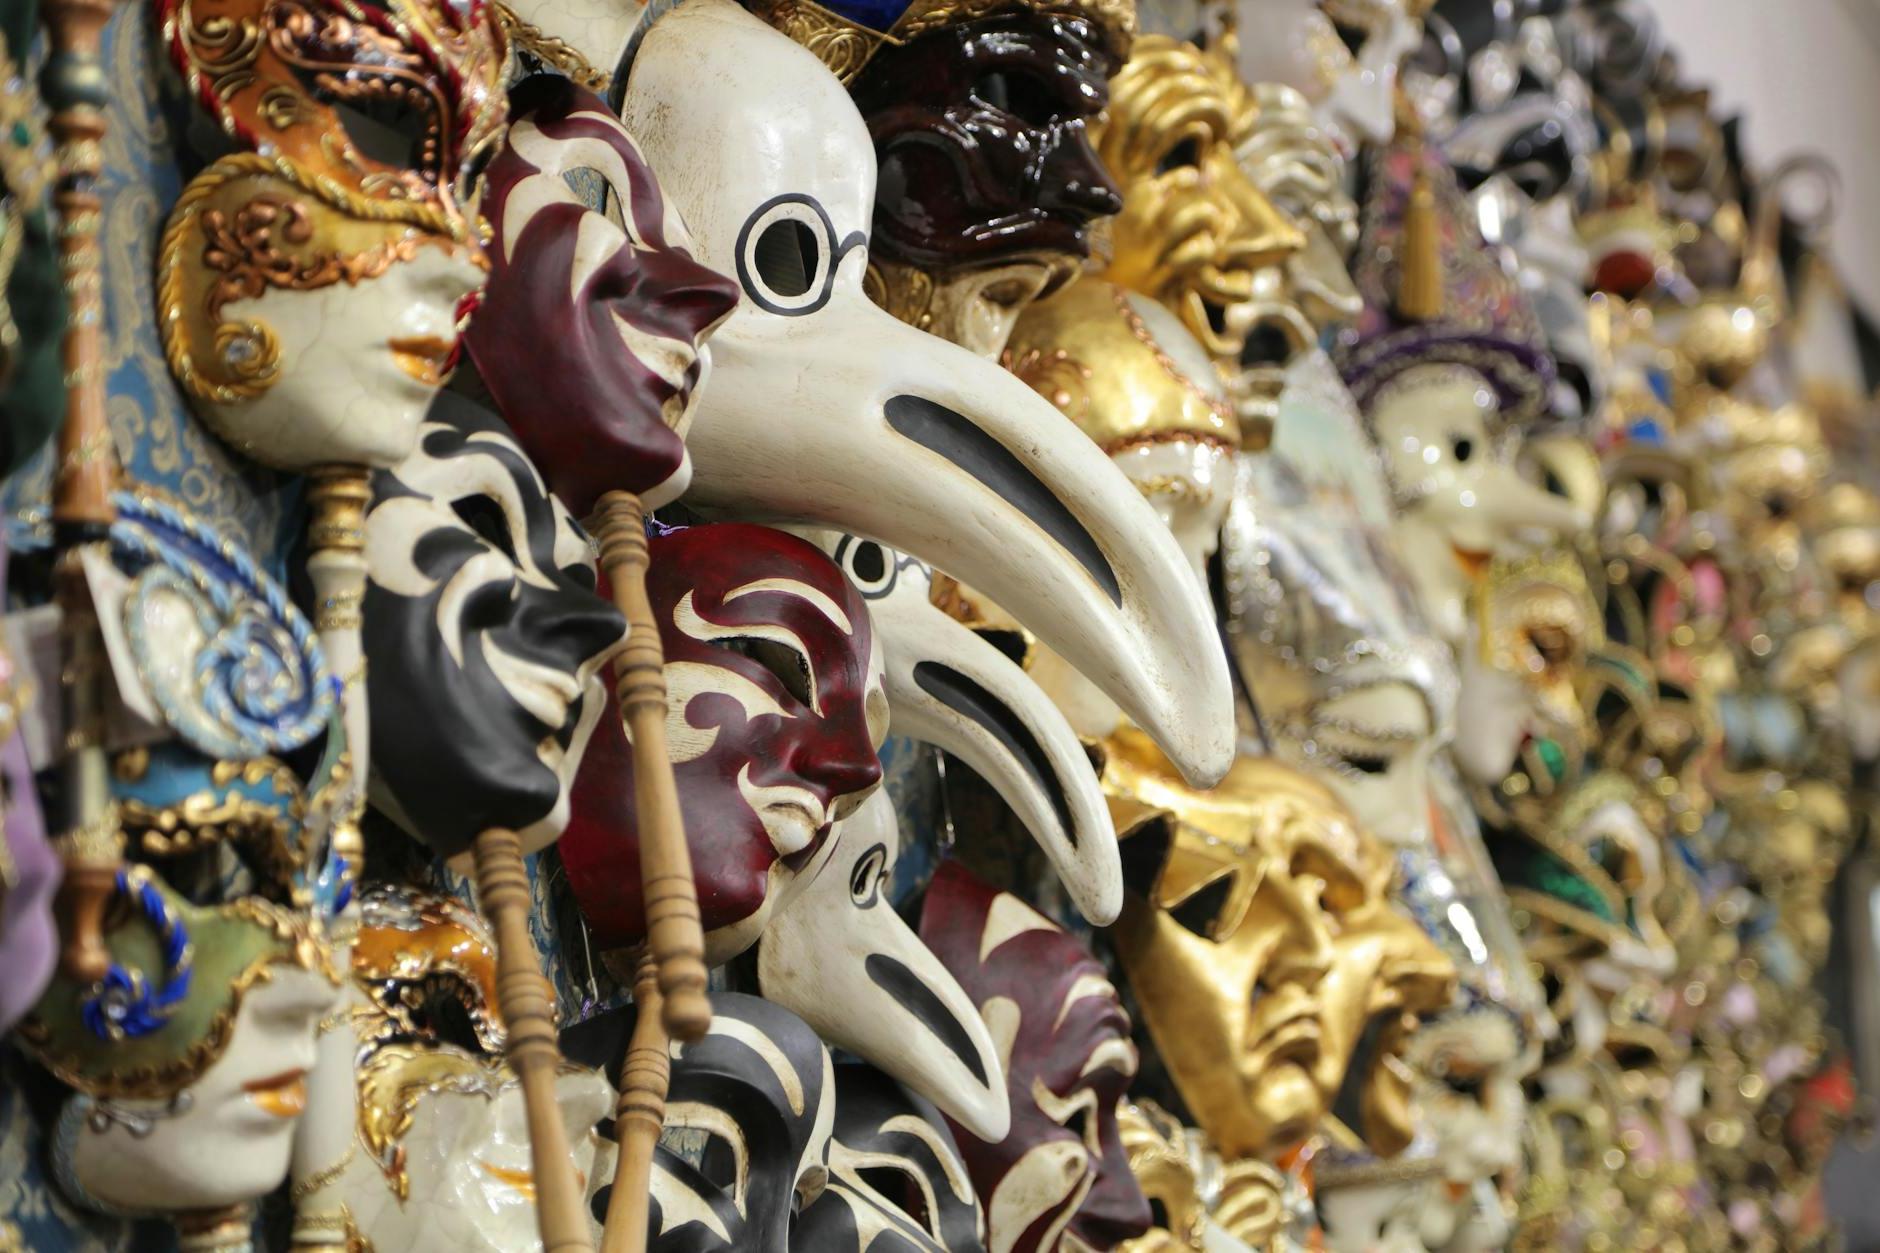 Venetian traditional masks for sale in stall